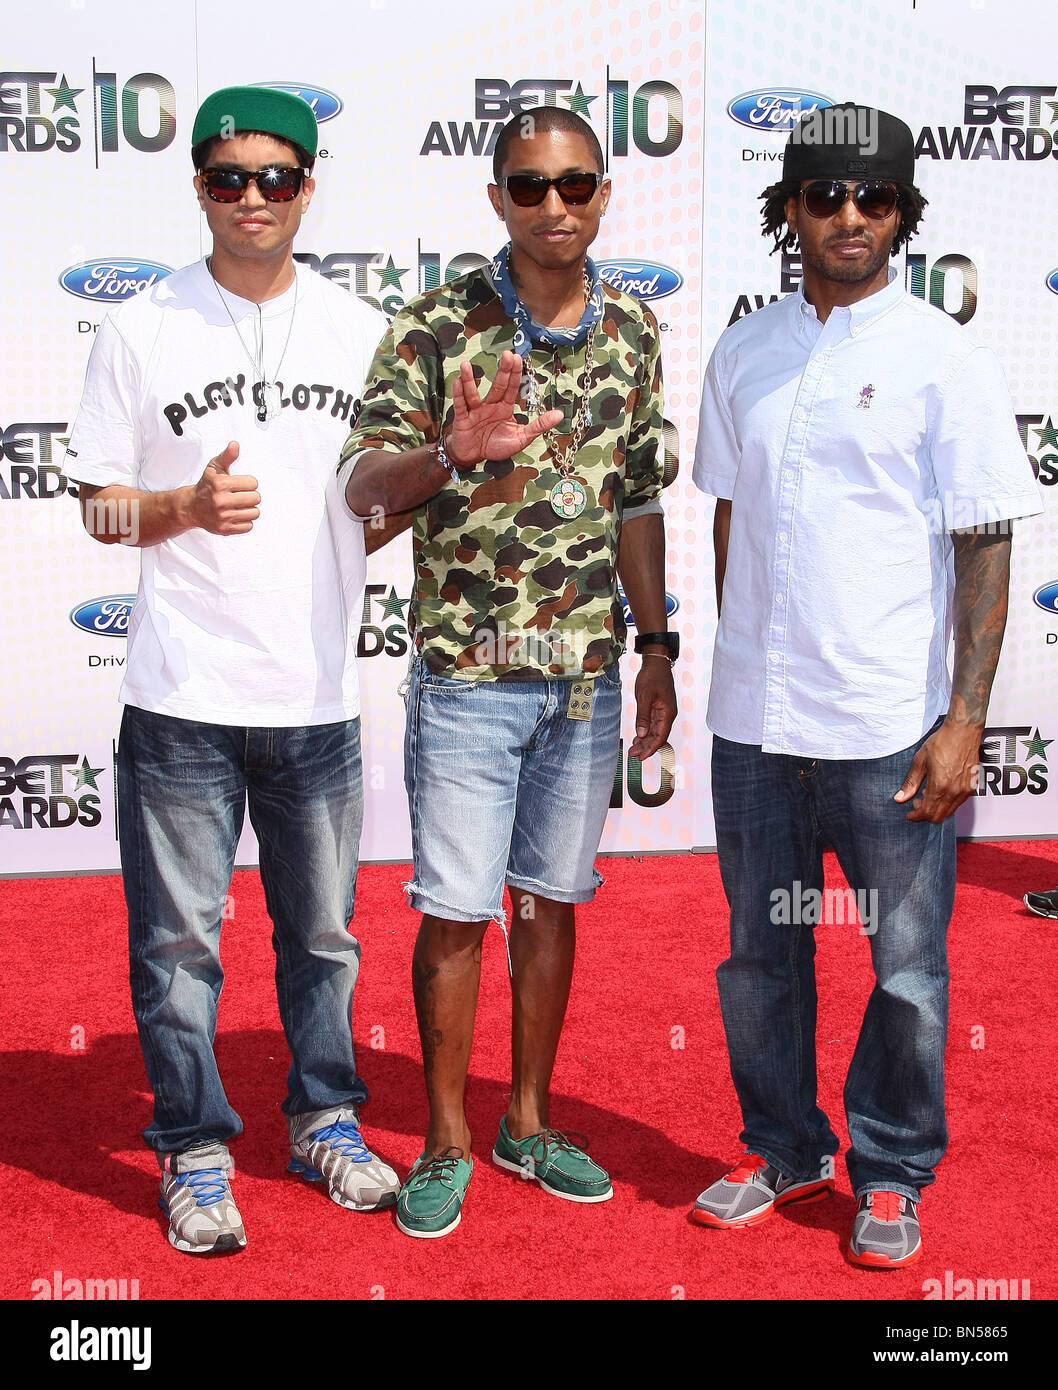 N.E.R.D. BET AWARDS 10 ARRIVALS DOWNTOWN LOS ANGELES CA 27 June 2010 Stock Photo